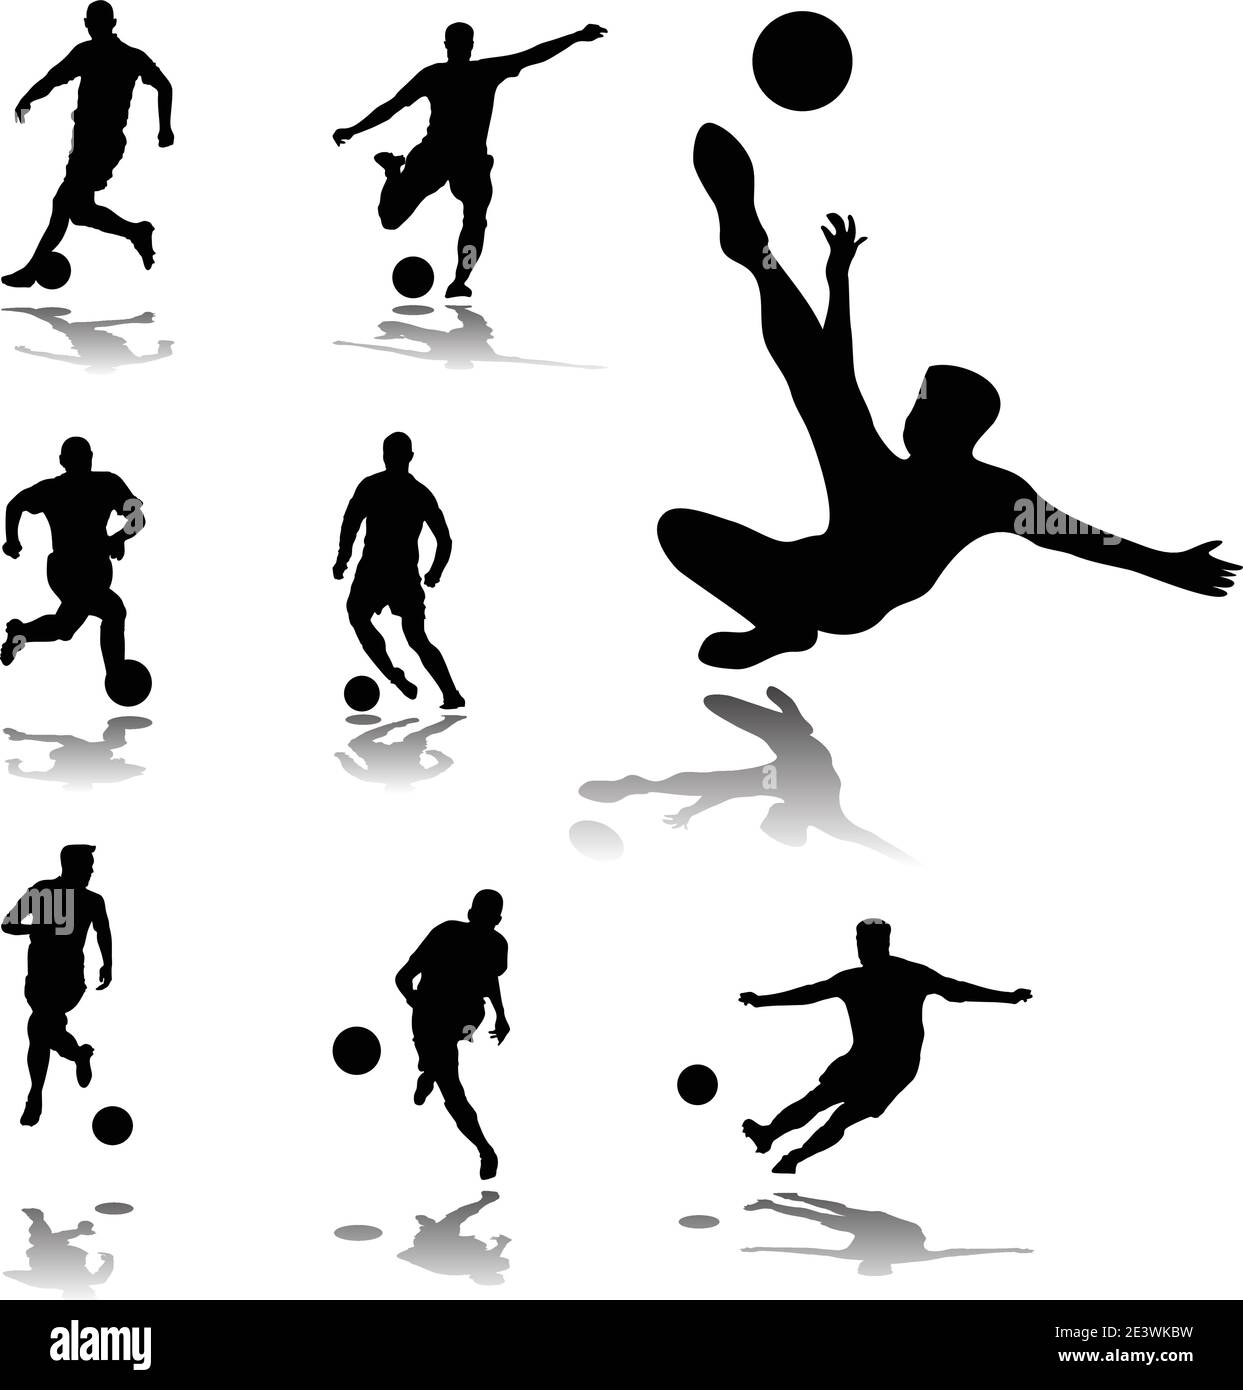 soccer players silhouette vector Stock Vector